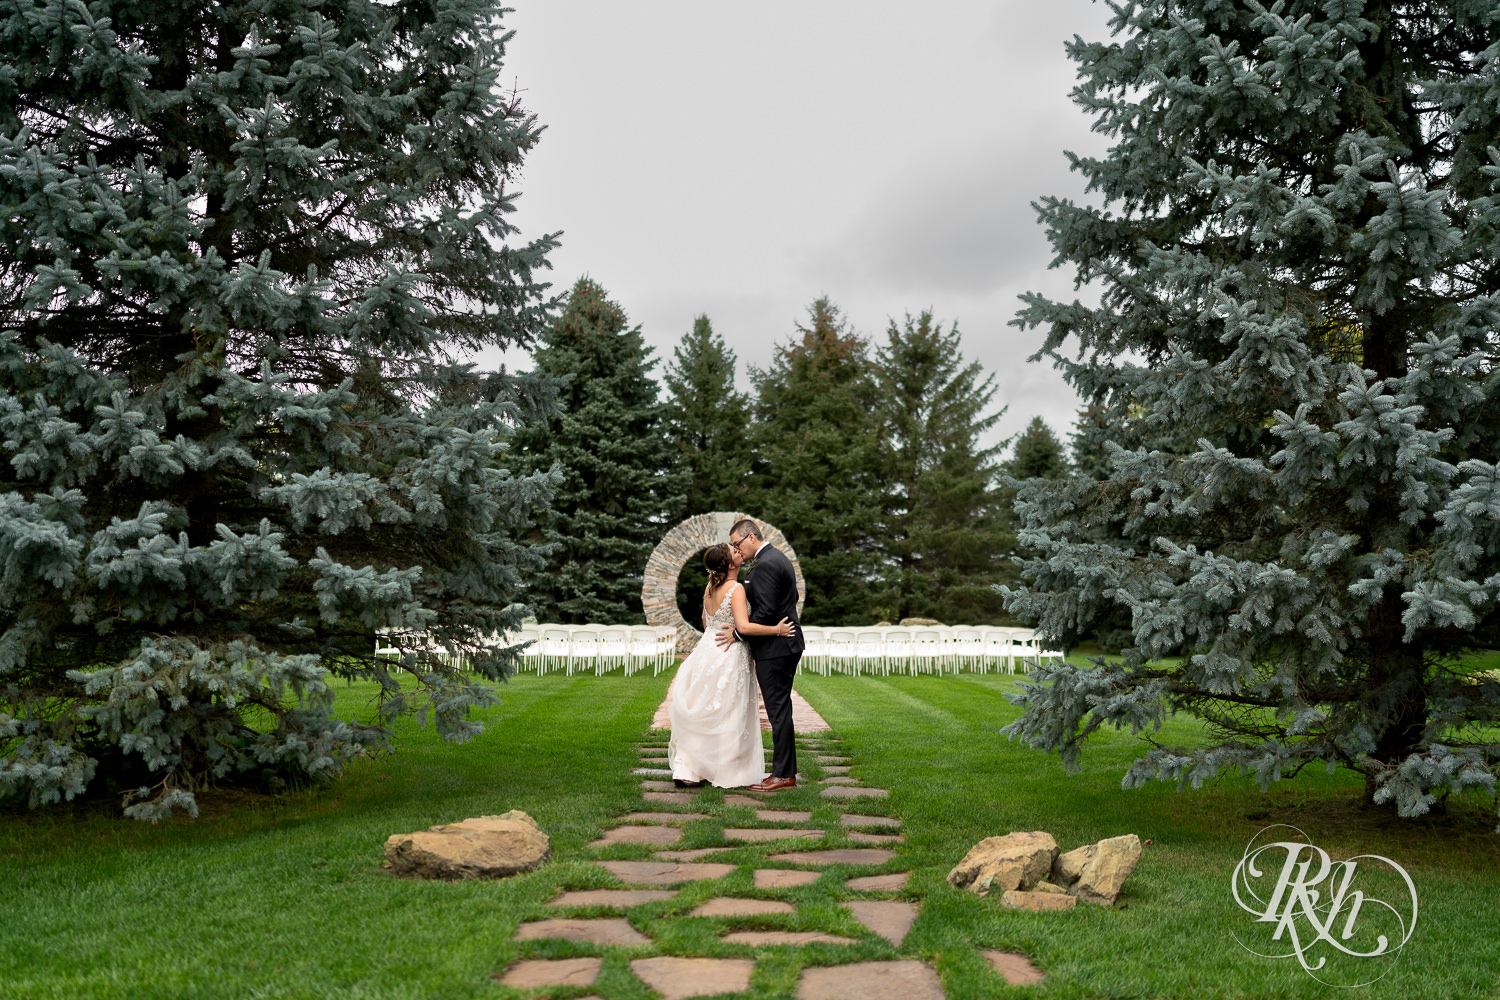 Bride and groom kissing each other on rainy day at Glenhaven Events in Farmington, Minnesota.